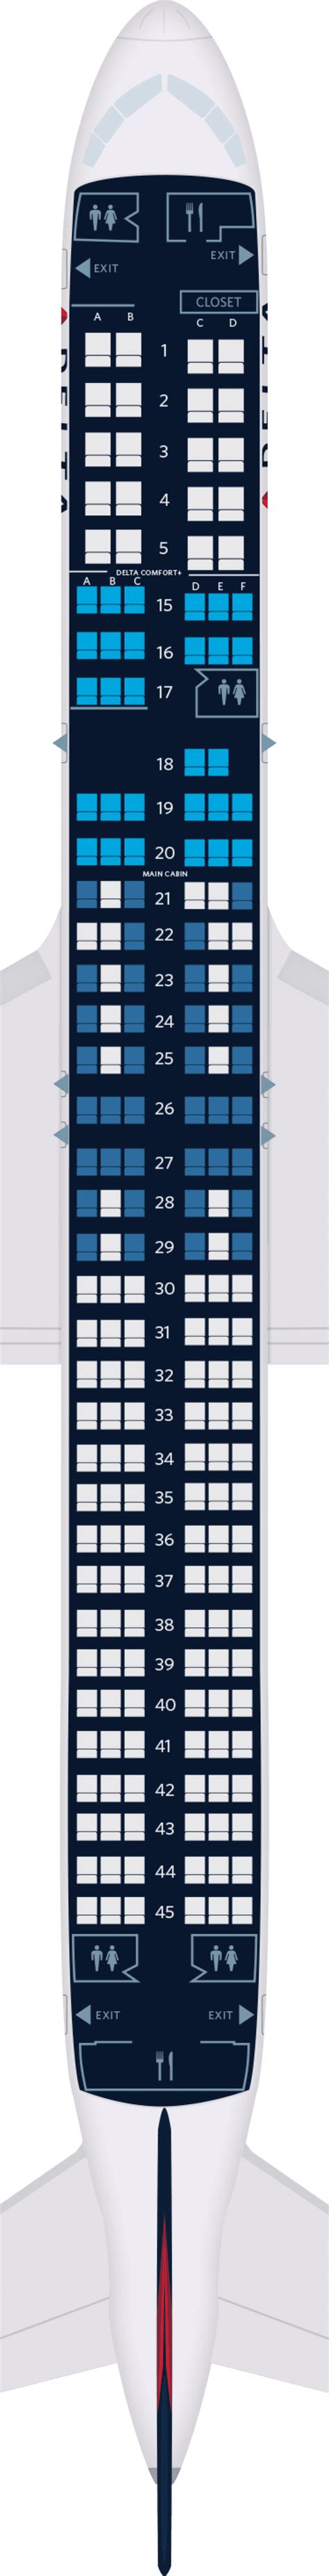 delta airlines boeing 757 200 seating chart